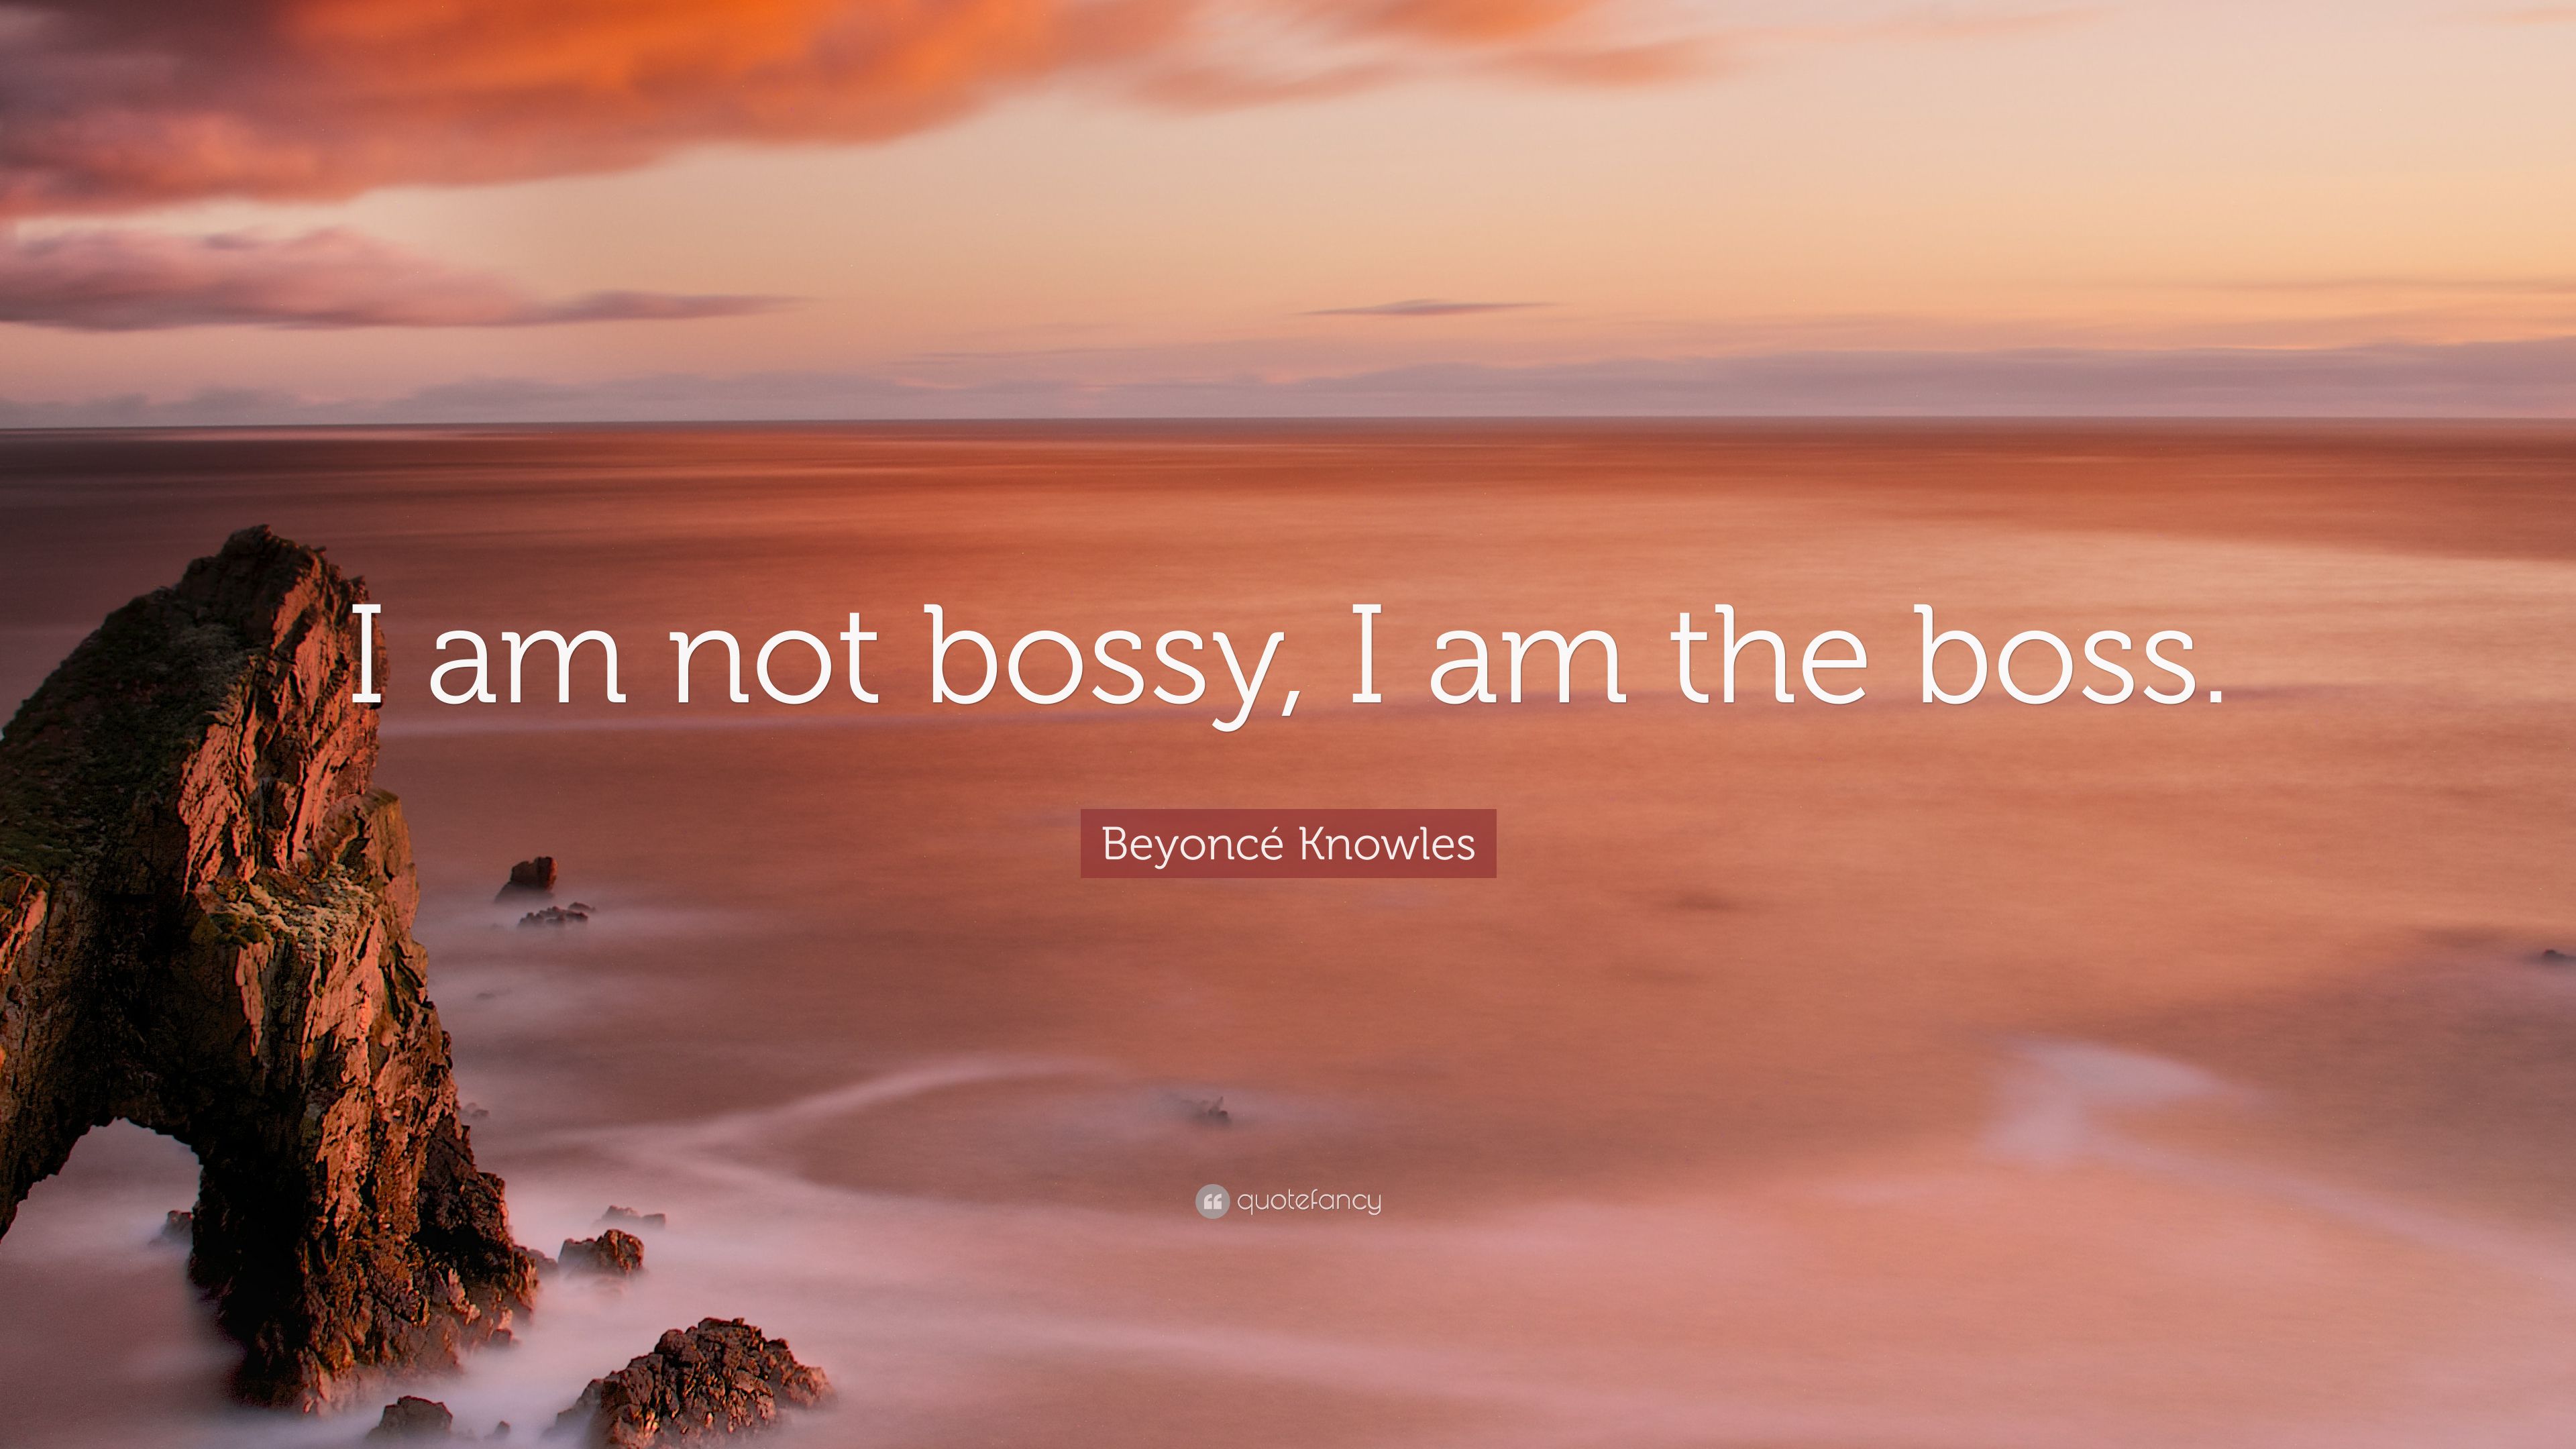 Beyoncé Knowles Quote: “I am not bossy, I am the boss.” (7 wallpaper)